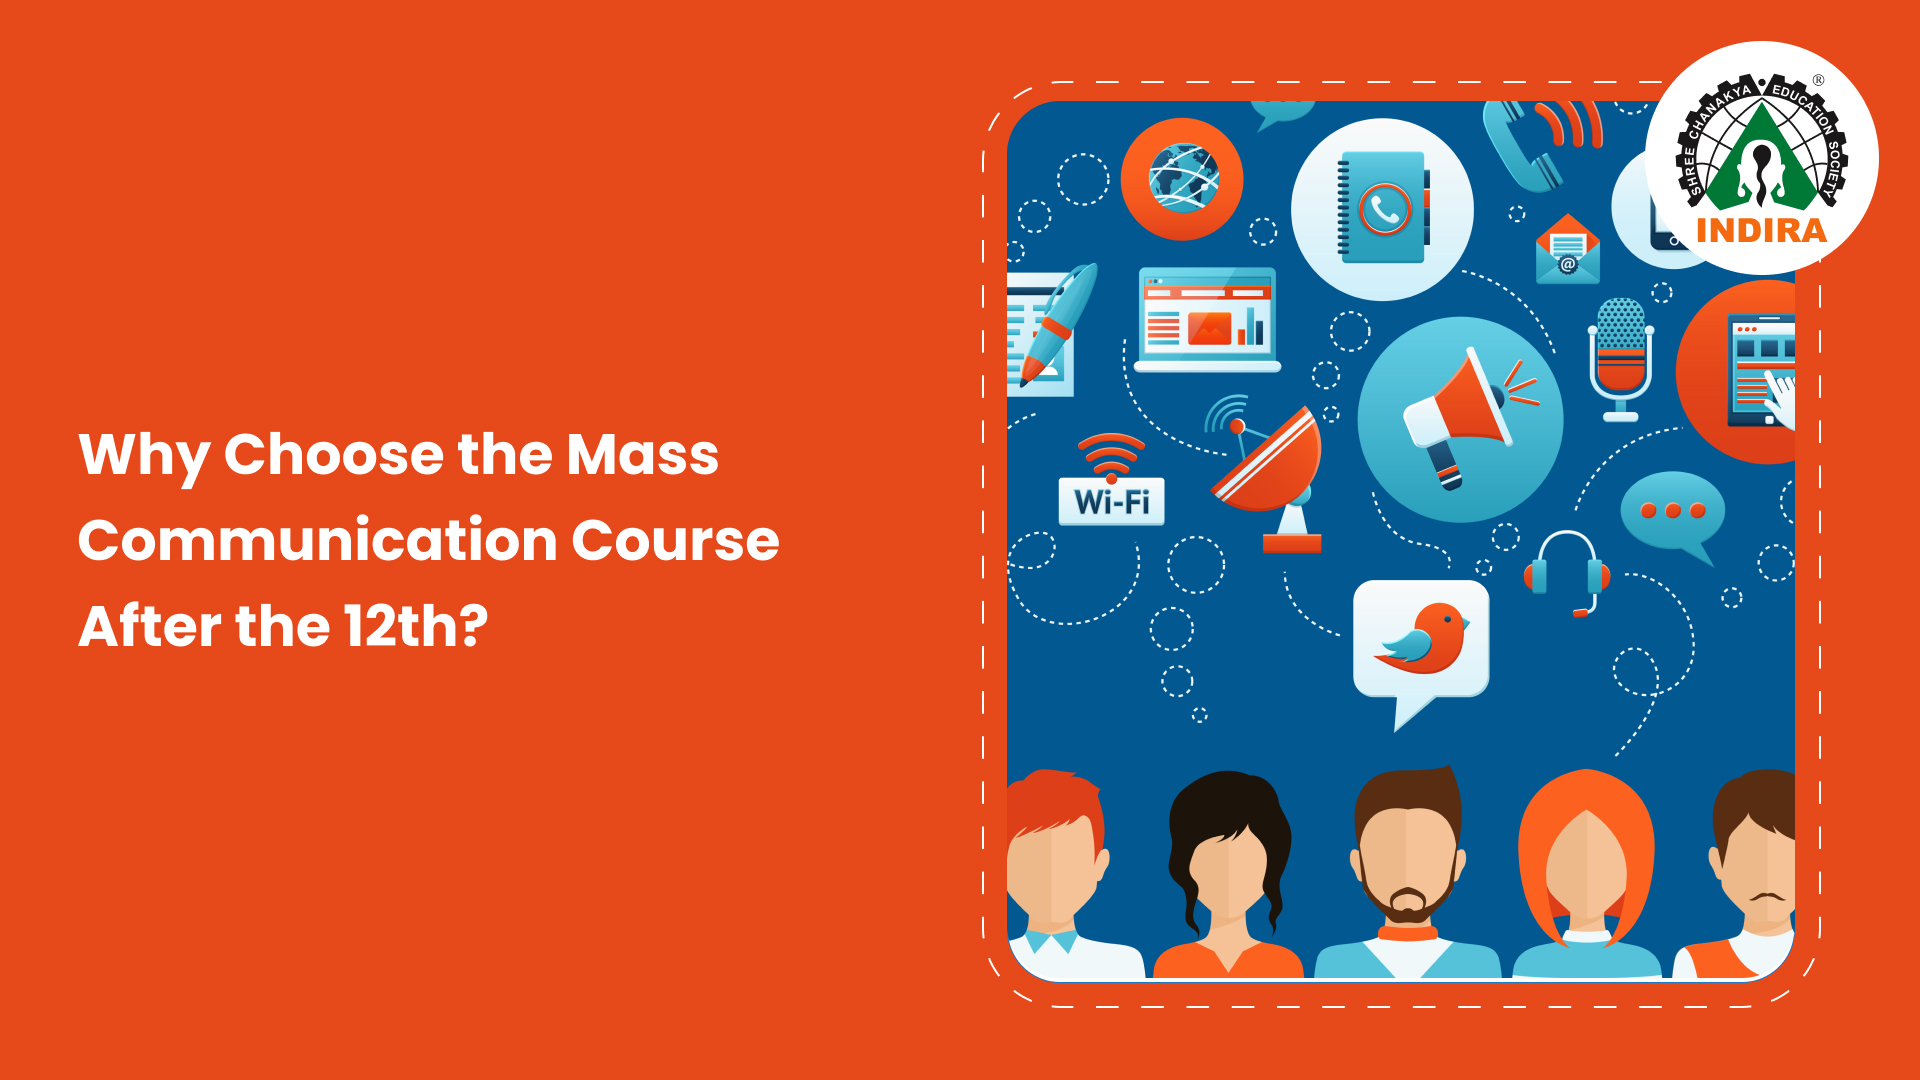  Why Choose the Mass Communication Course After the 12th?